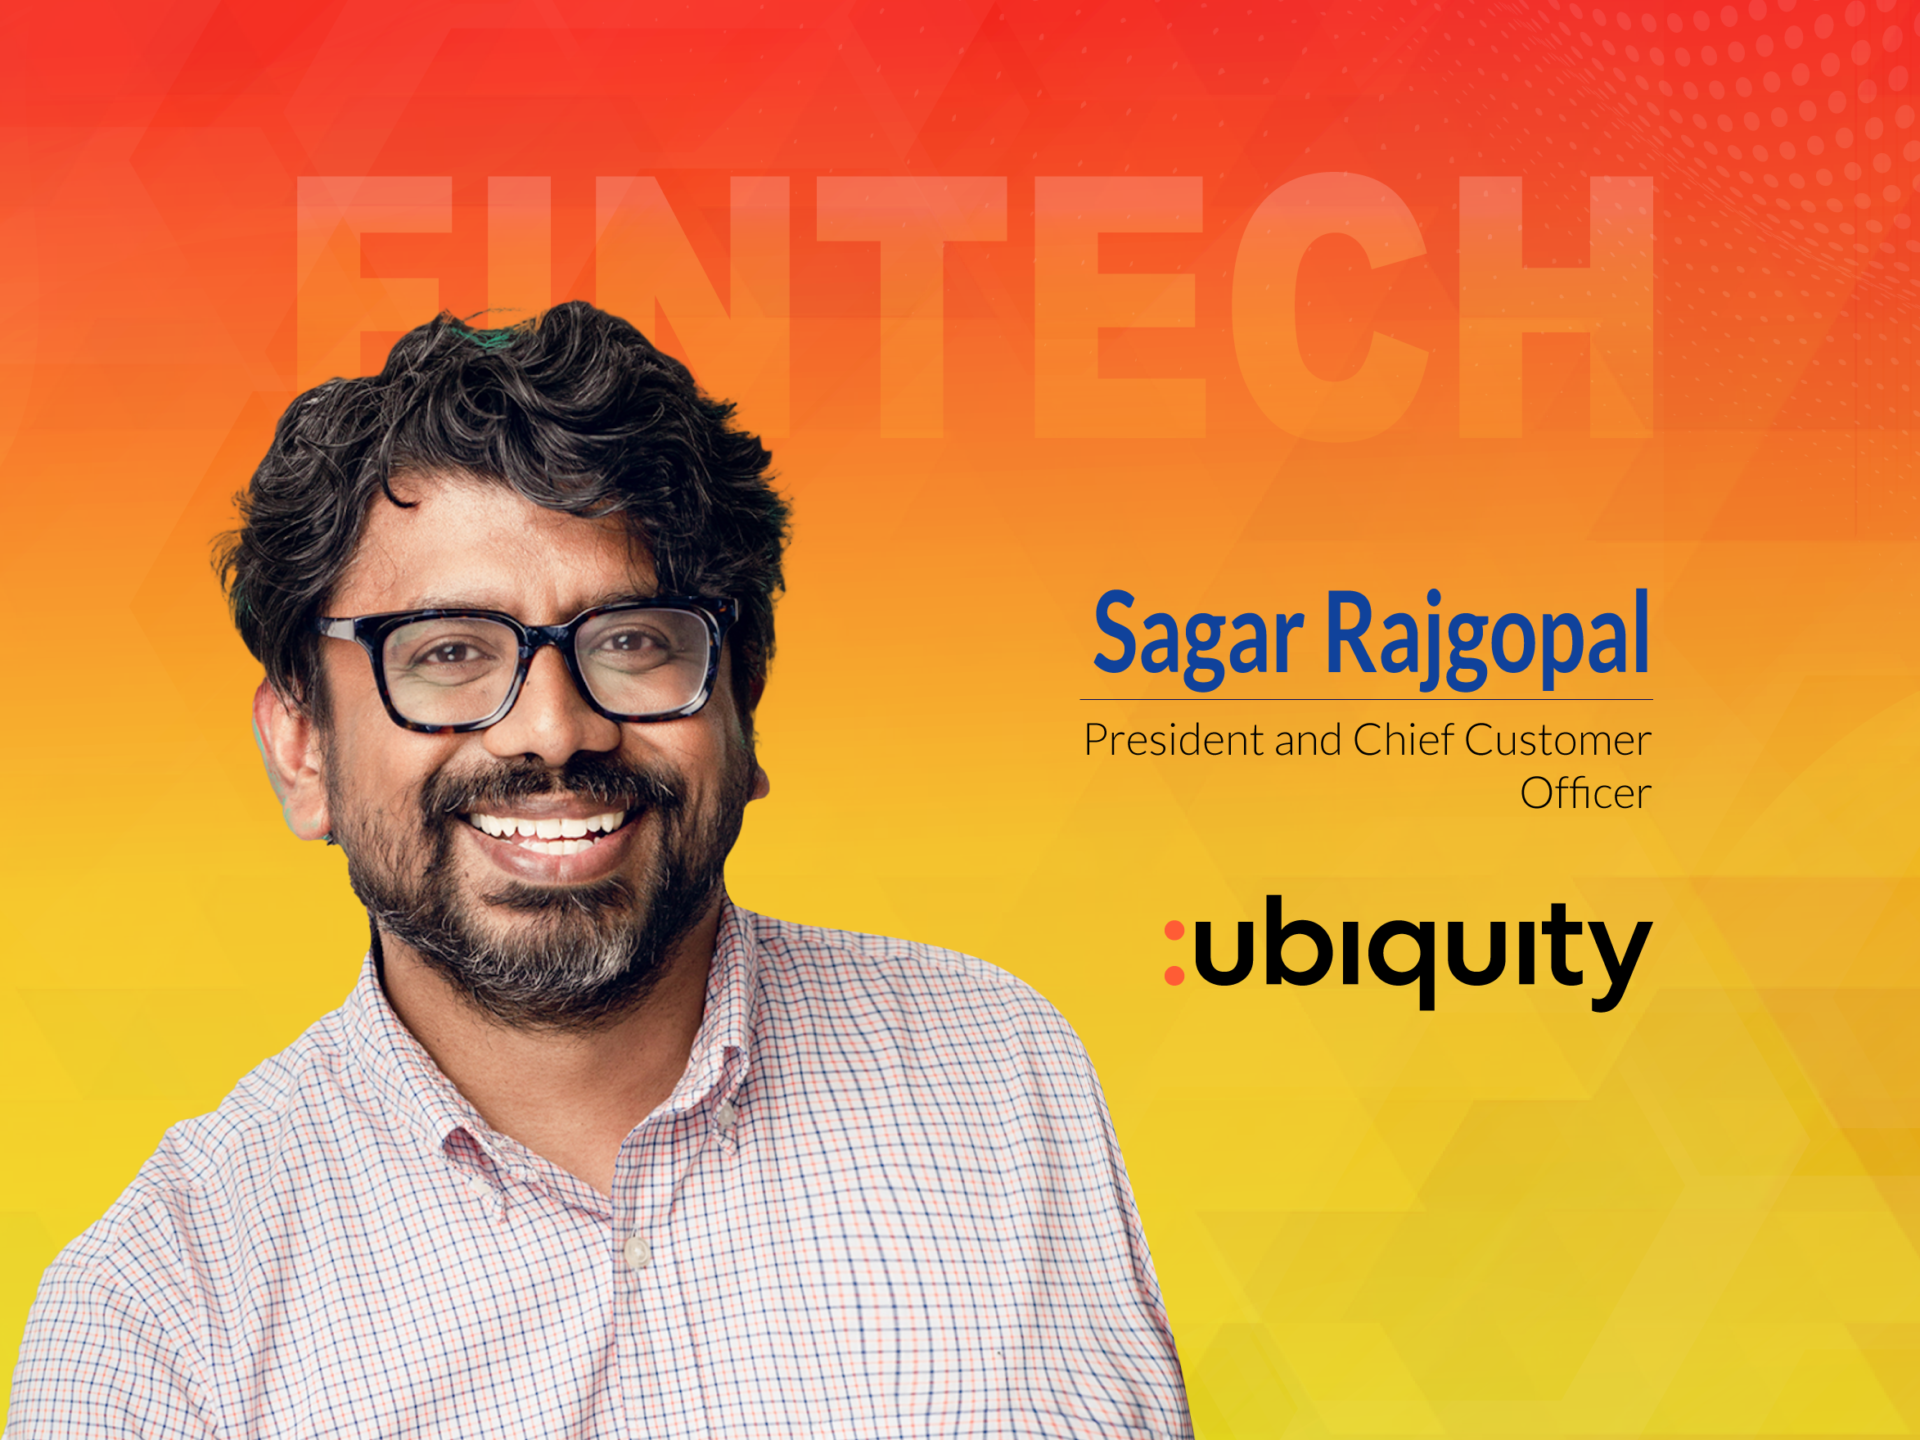 Global Fintech Interview with Sagar Rajgopal, President and Chief Customer Officer at Ubiquity